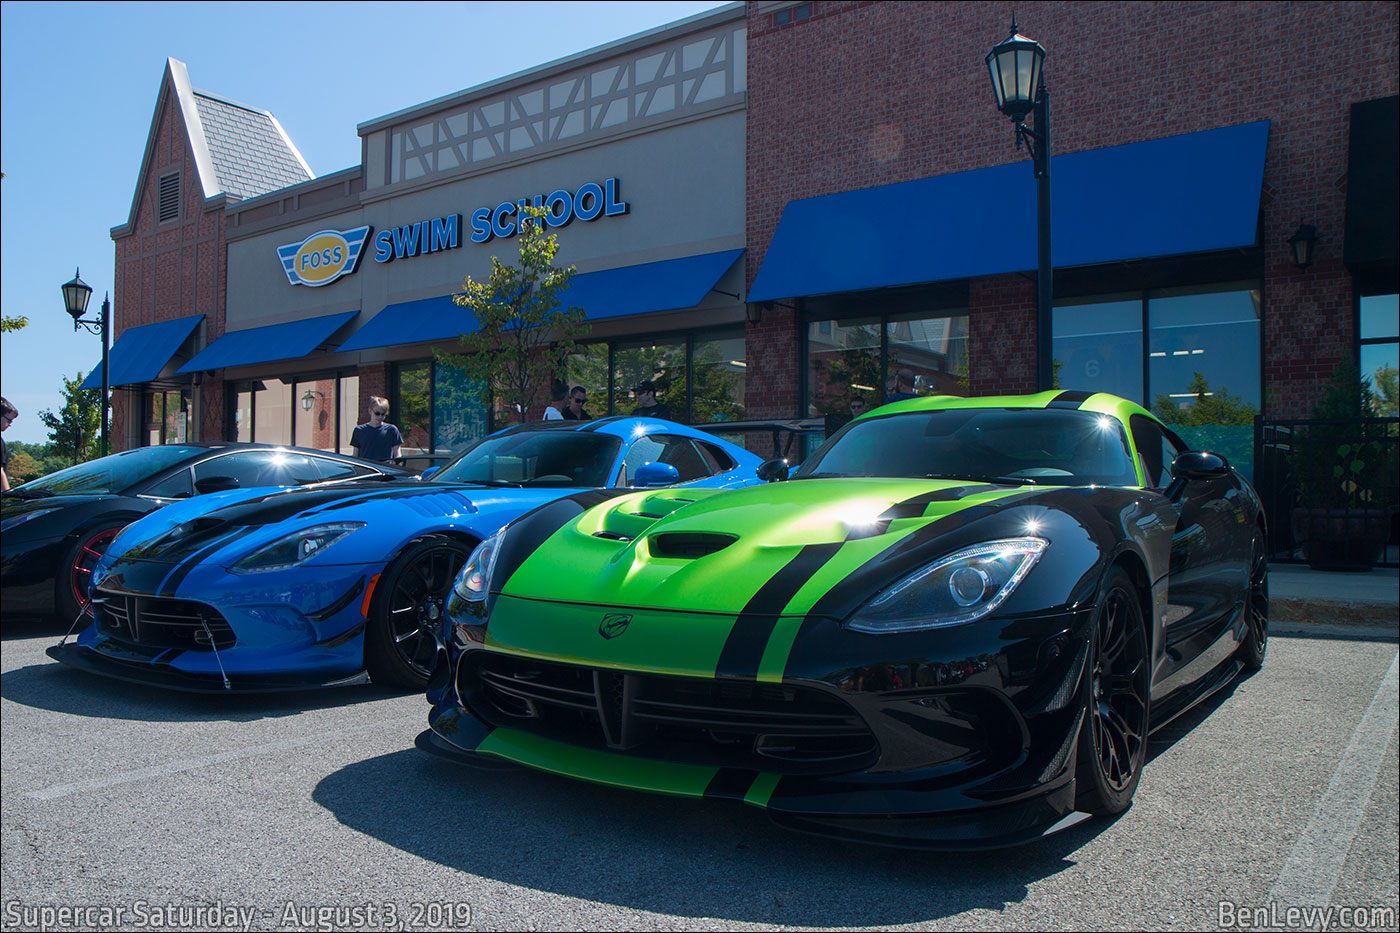 Pair of 2015 Dodge Vipers - BenLevy.com